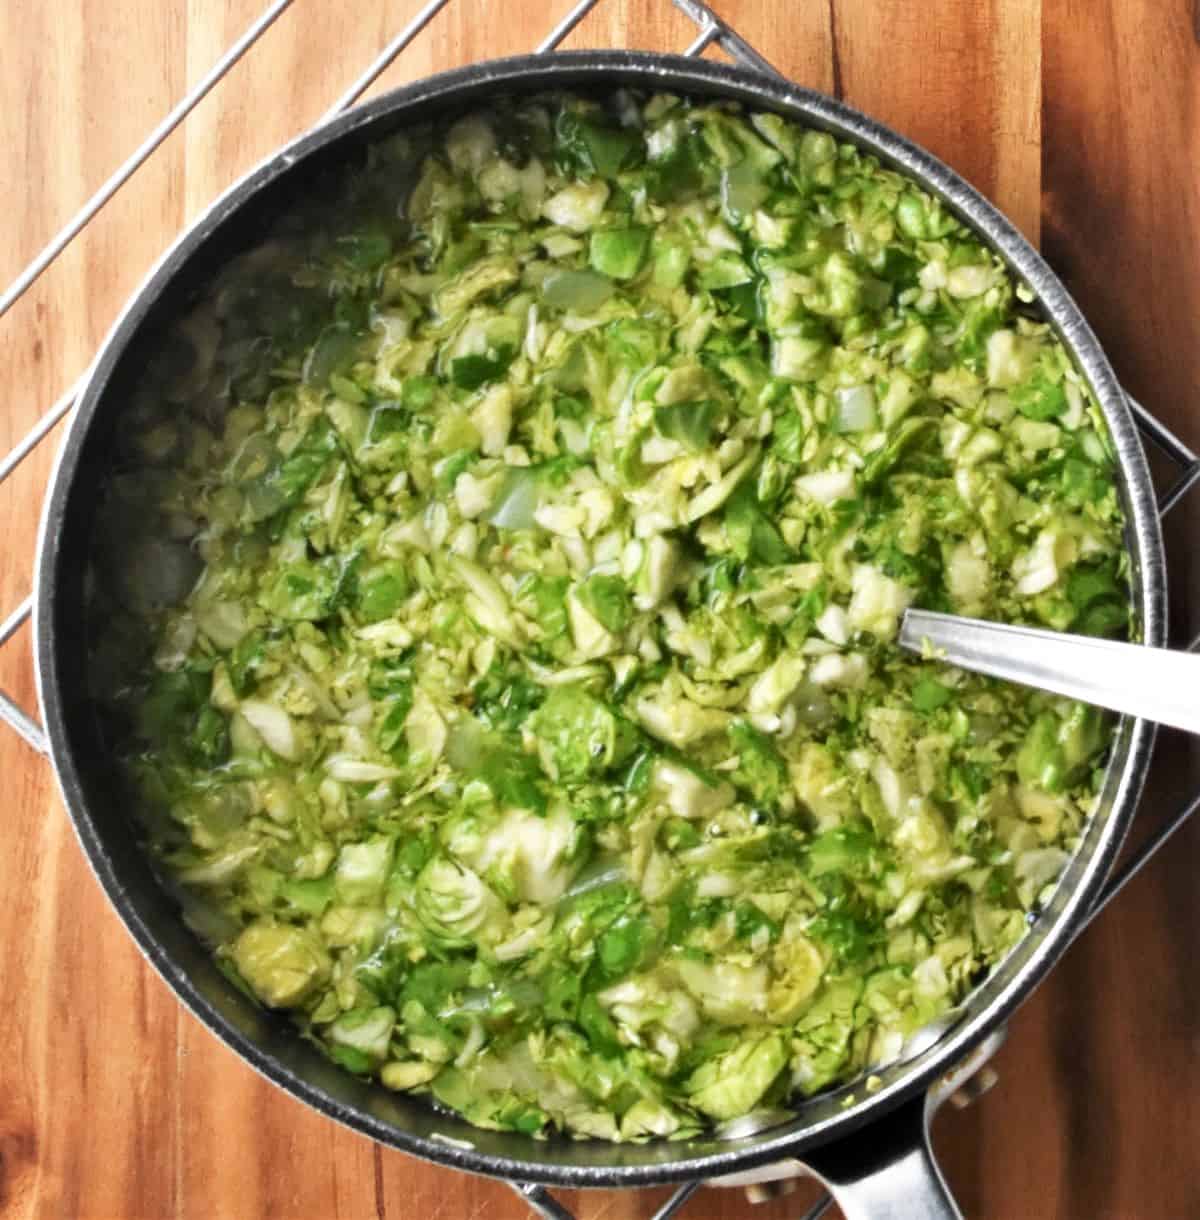 Cooking brussels sprouts soup in large pot with spoon.